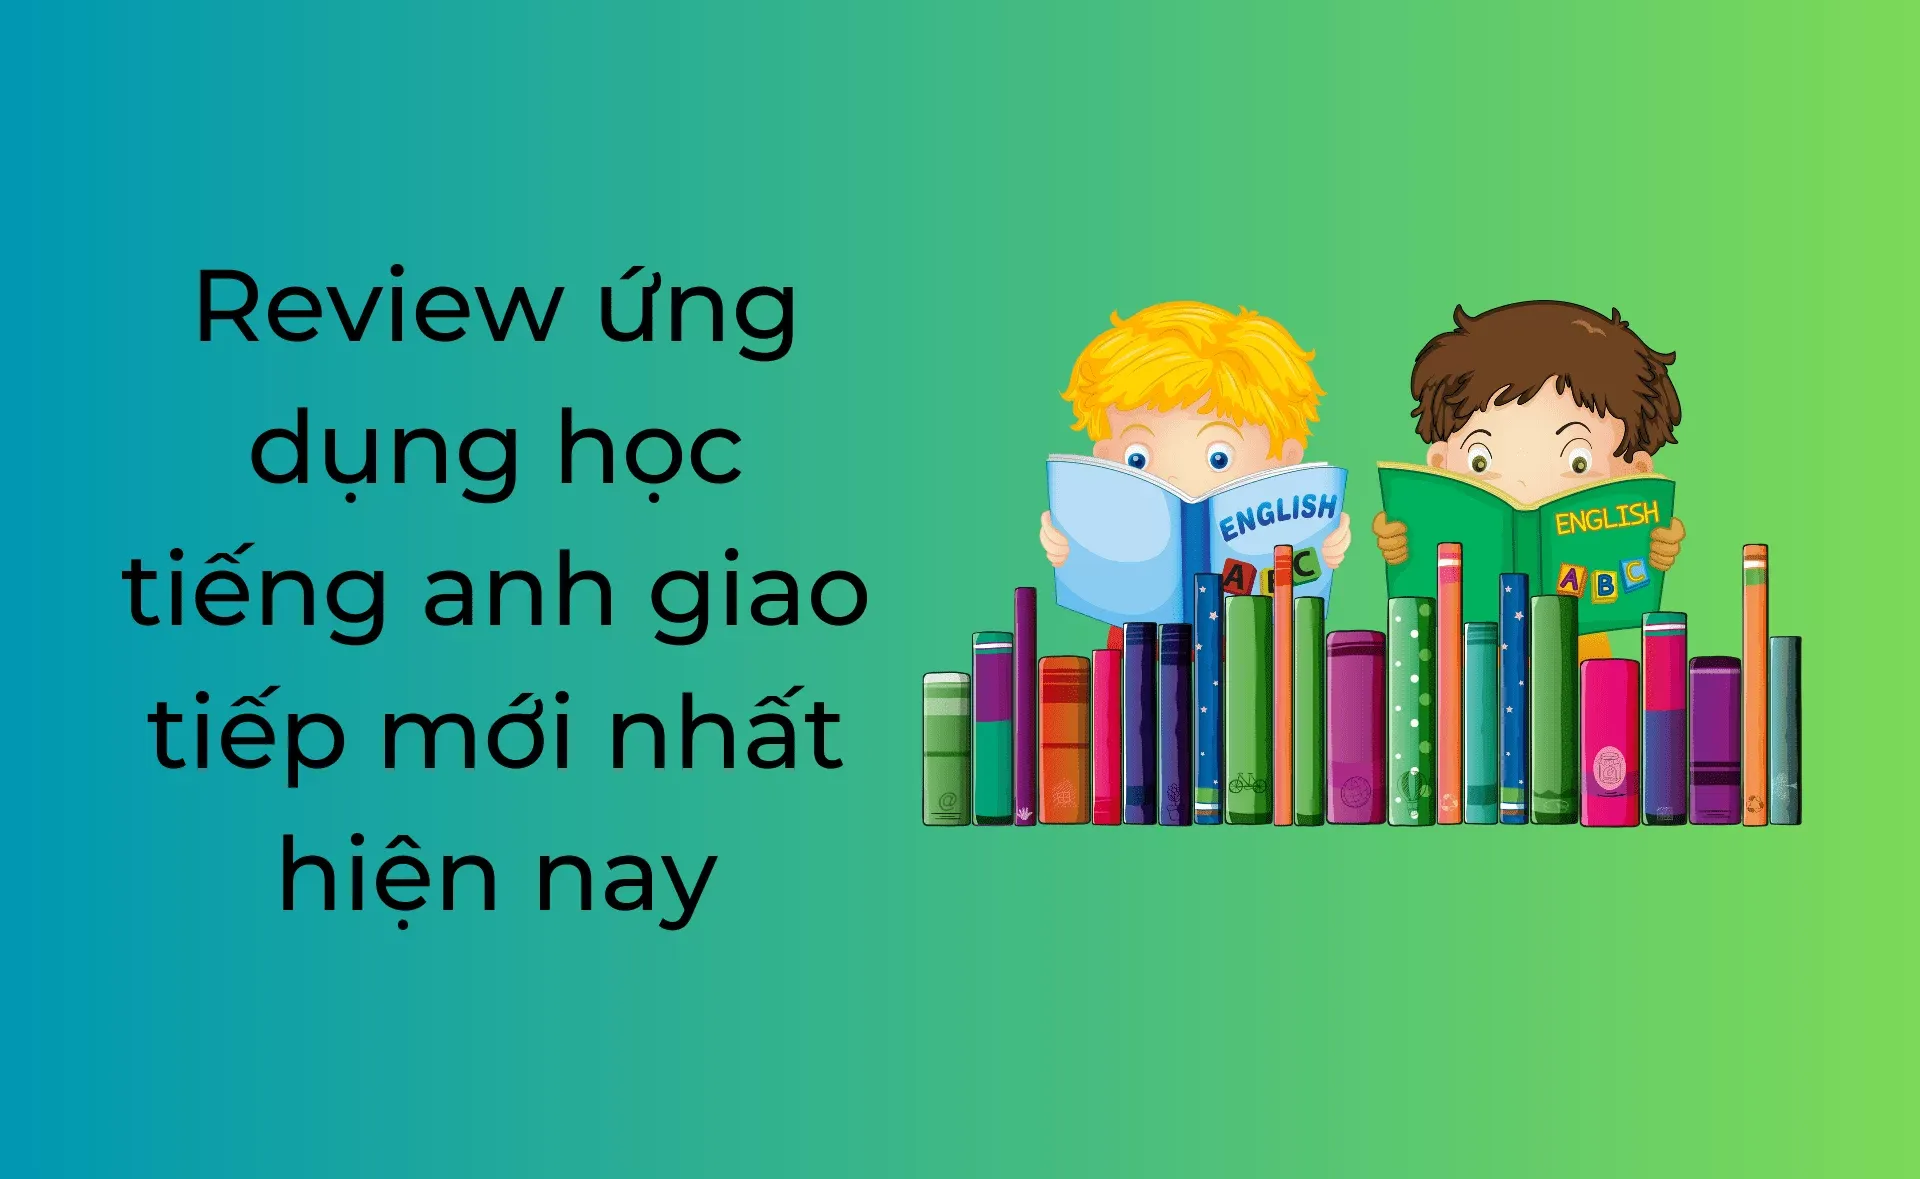 review ứng dụng học tiếng anh giao tiếp